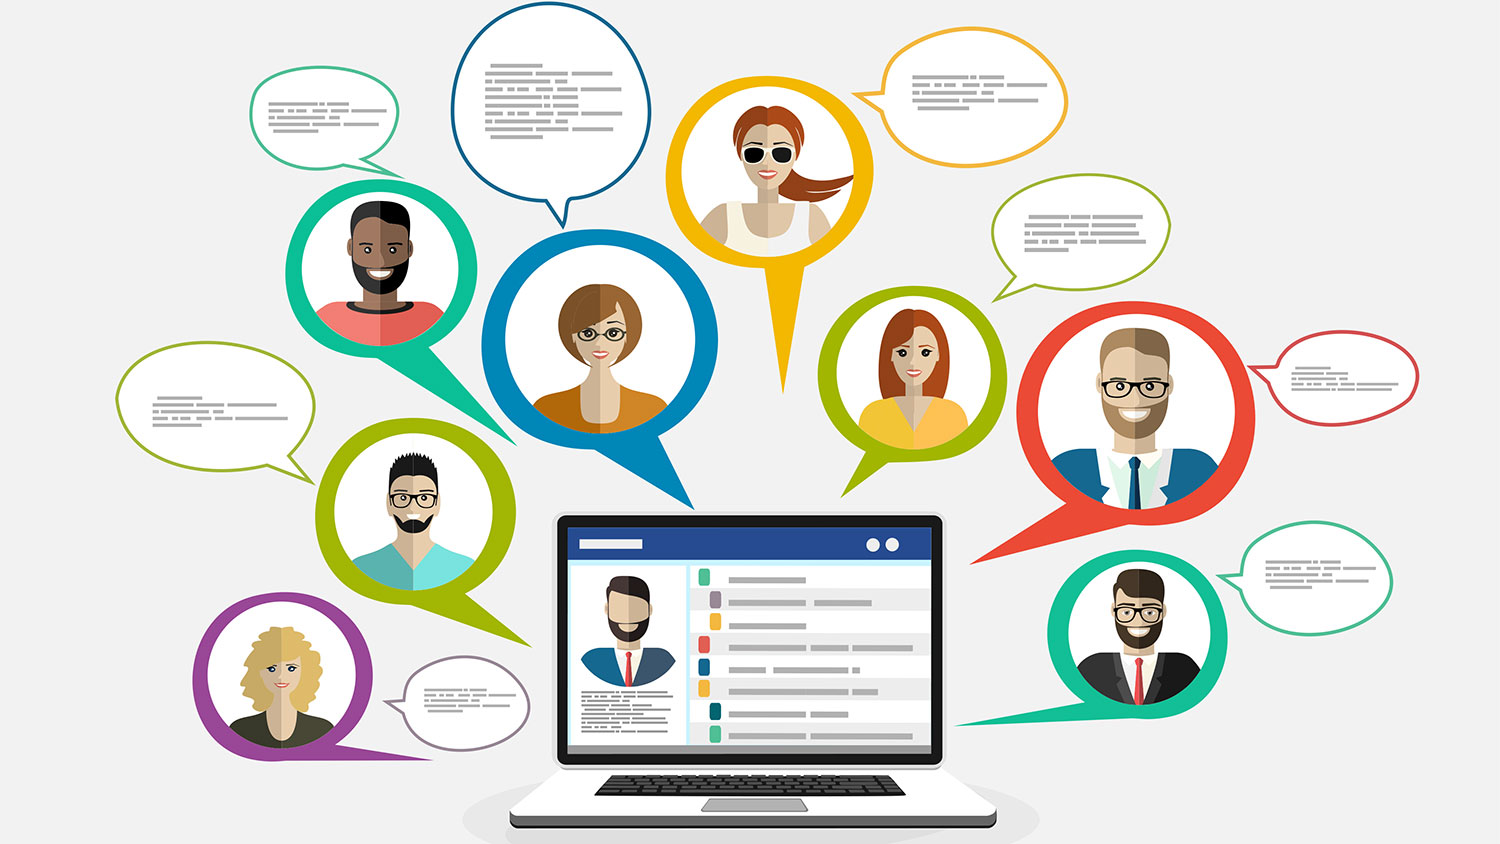 7 Tips For Running A Successful Forum Or Online Community - Ezoic